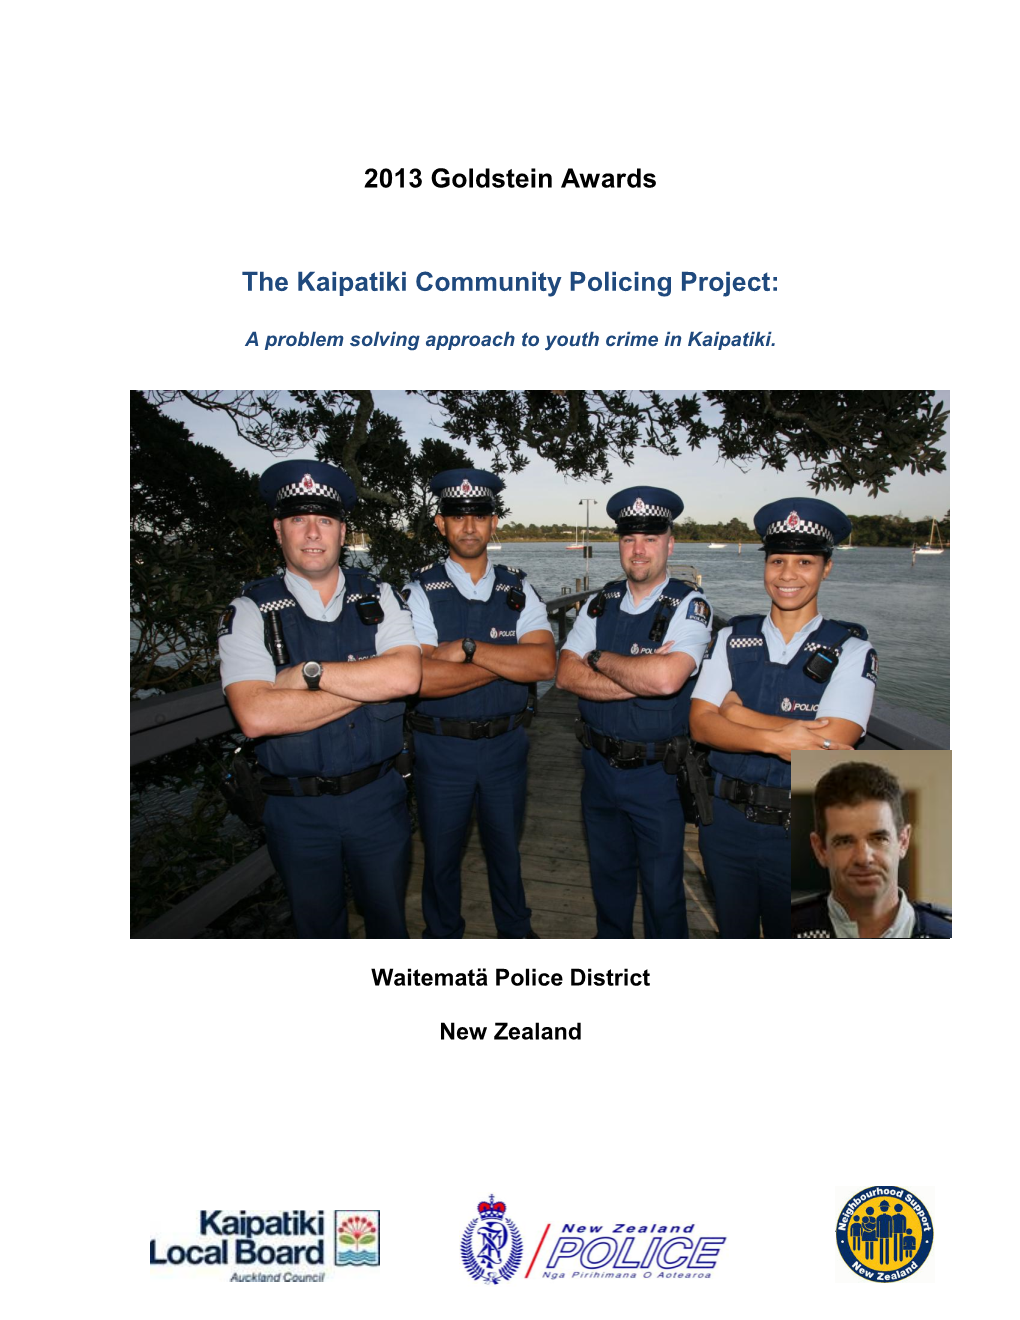 The Kaipatiki Community Policing Project